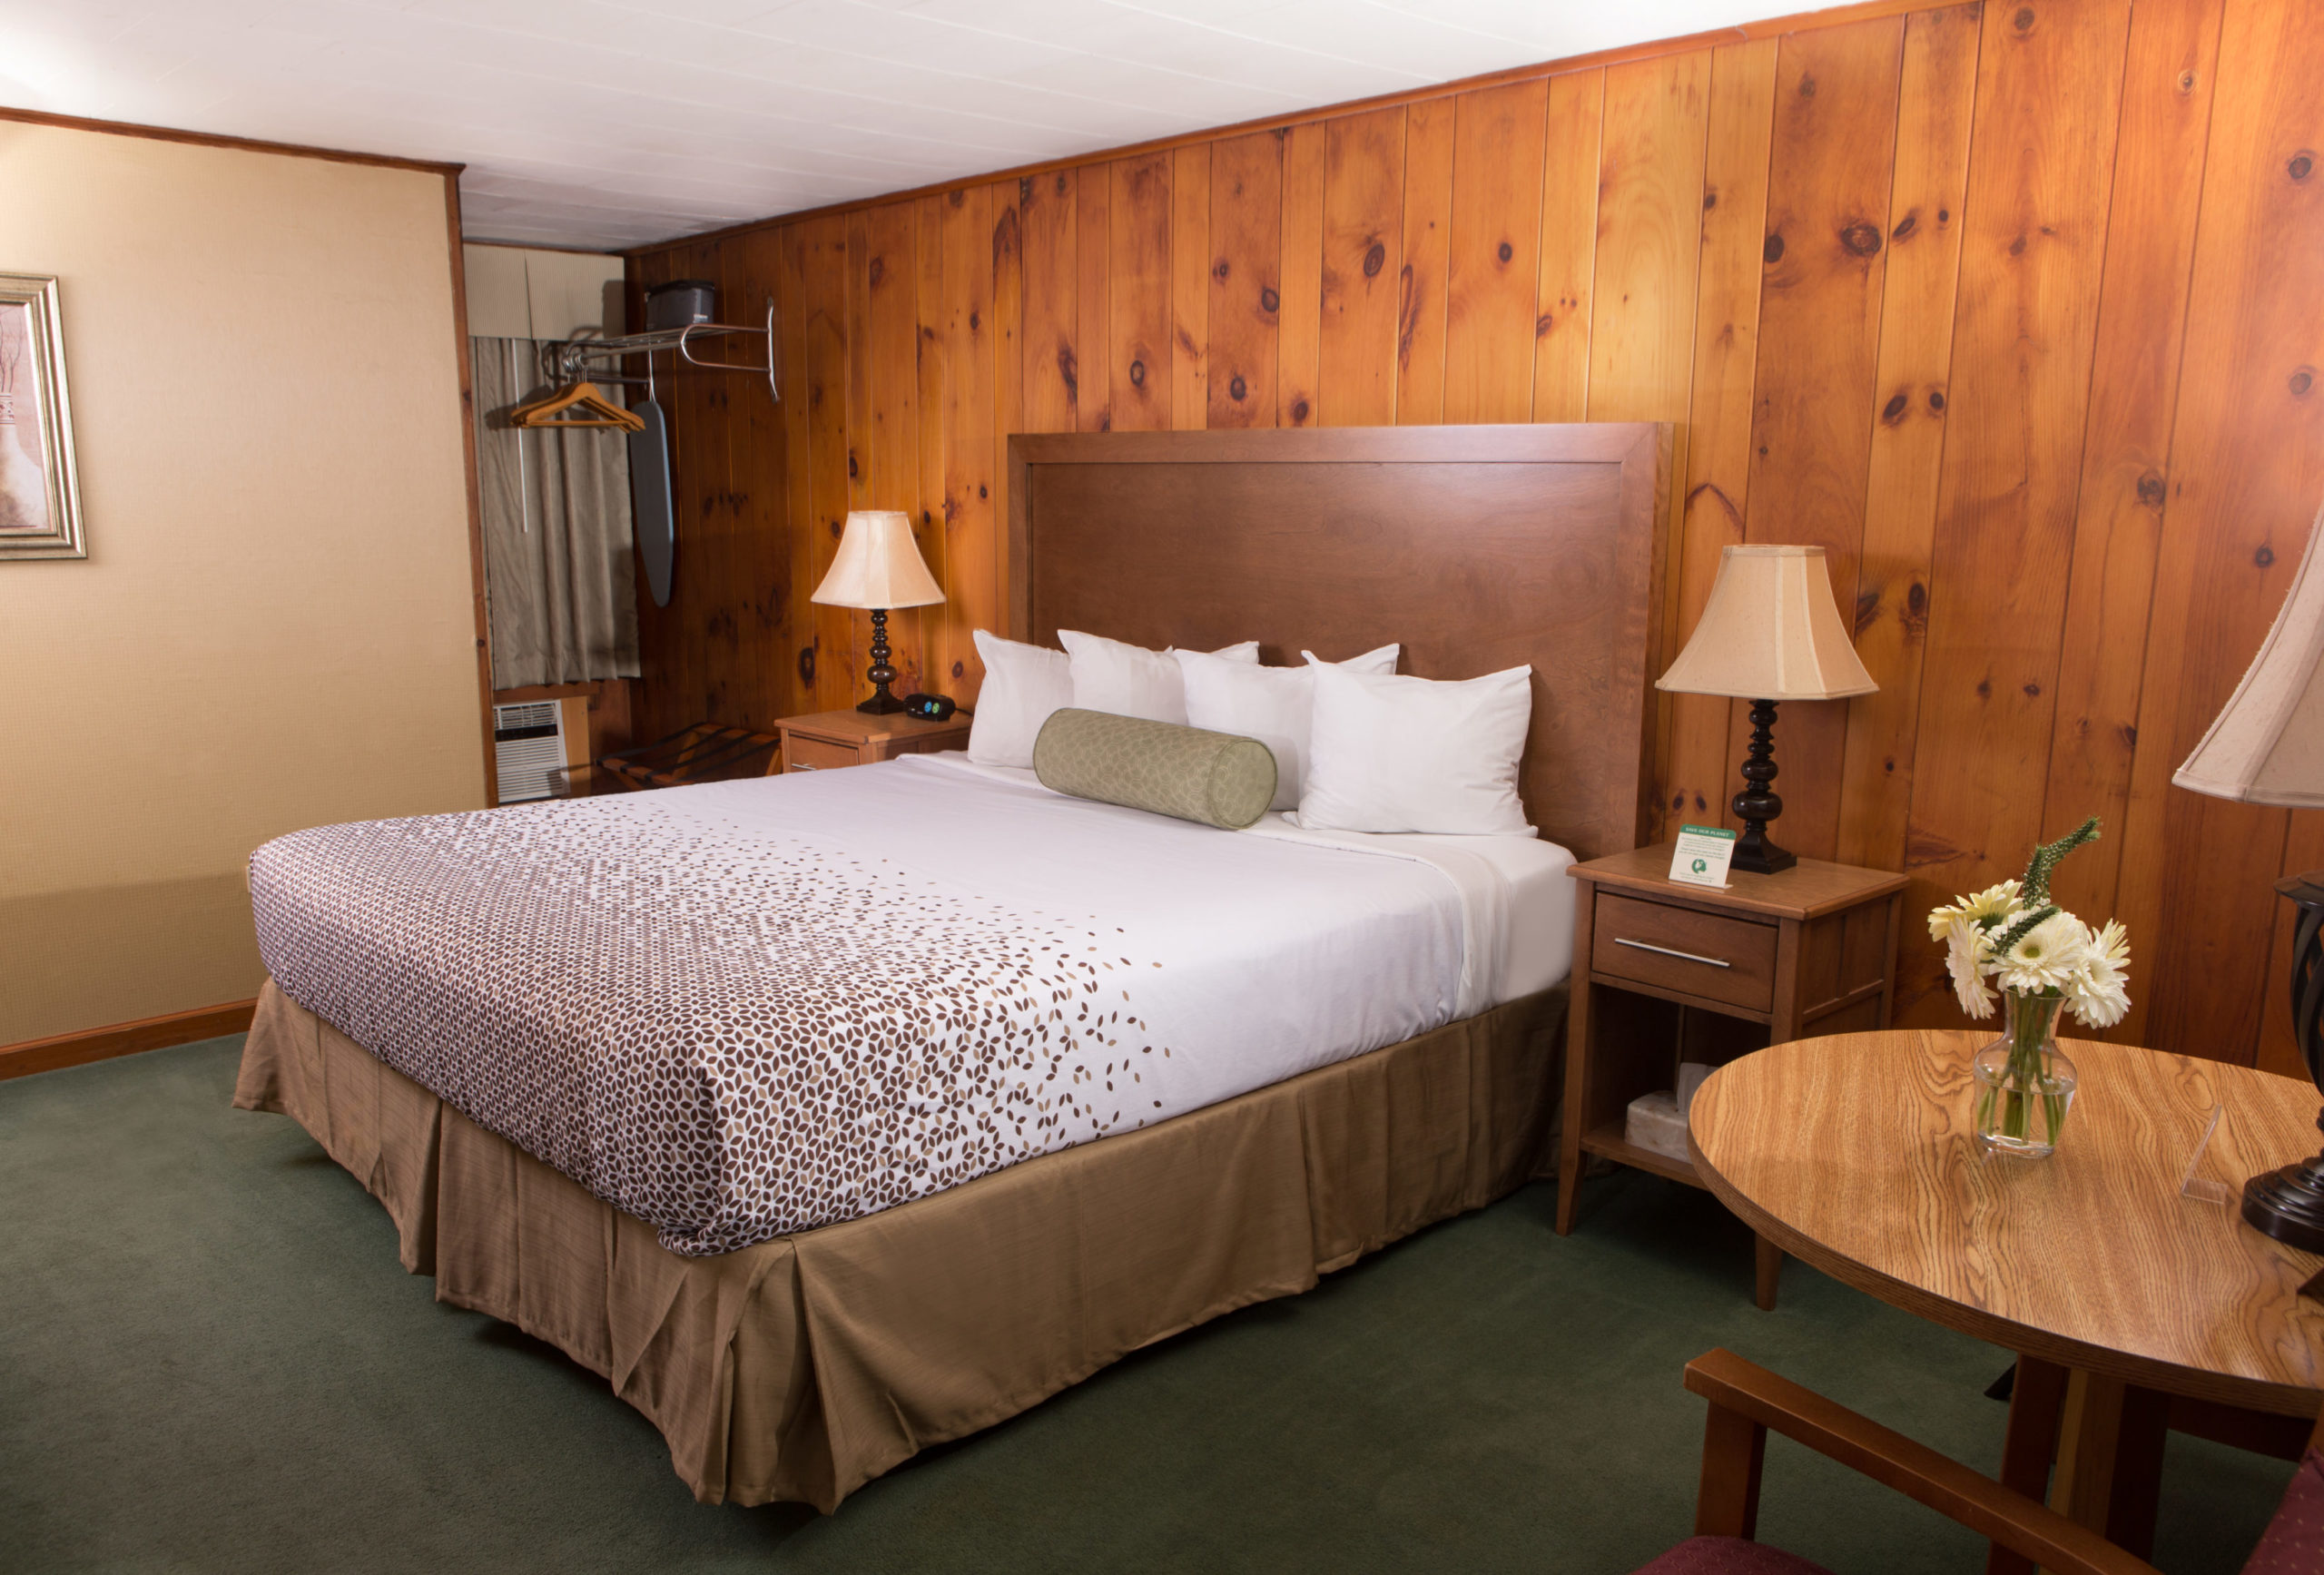 King Size Room at Knotty Pine Motel